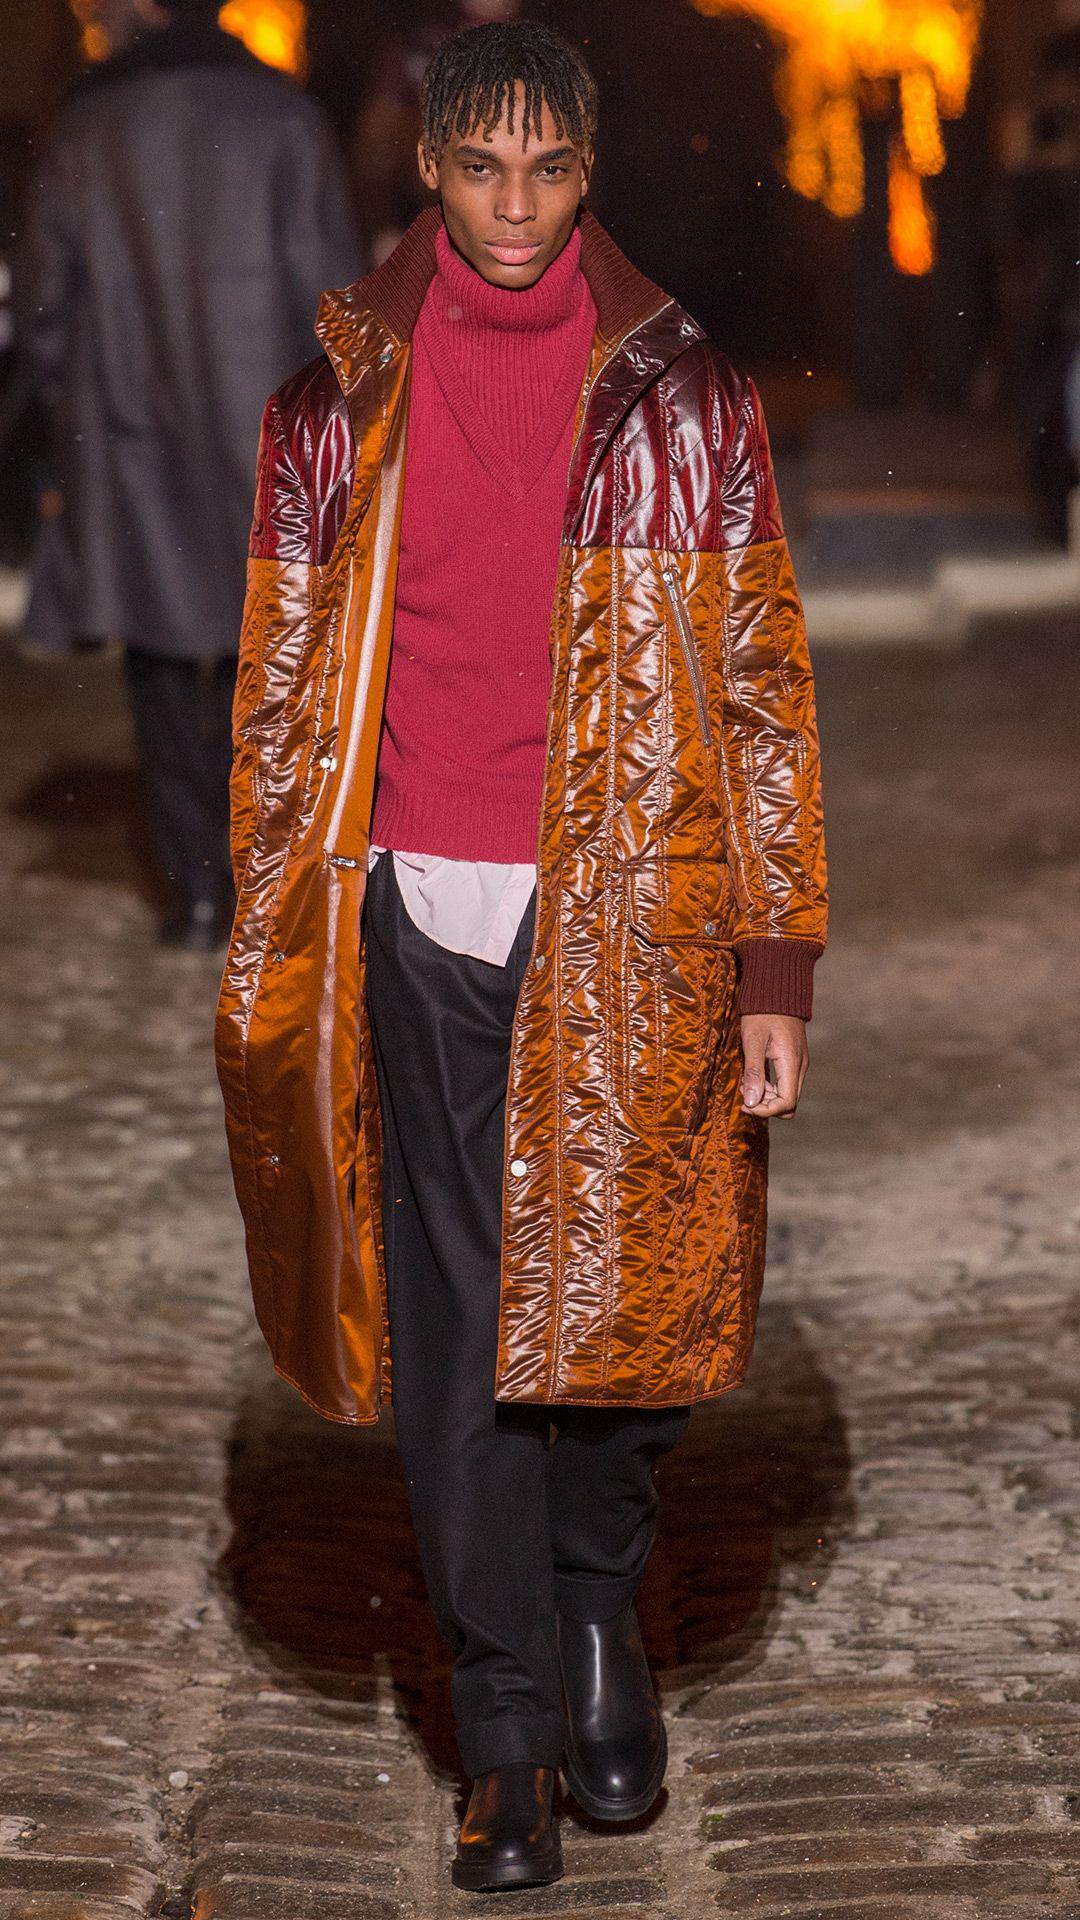 Hermés Fall/Winter 2018/19 Menswear Collection ‹ Fashion Trendsetter